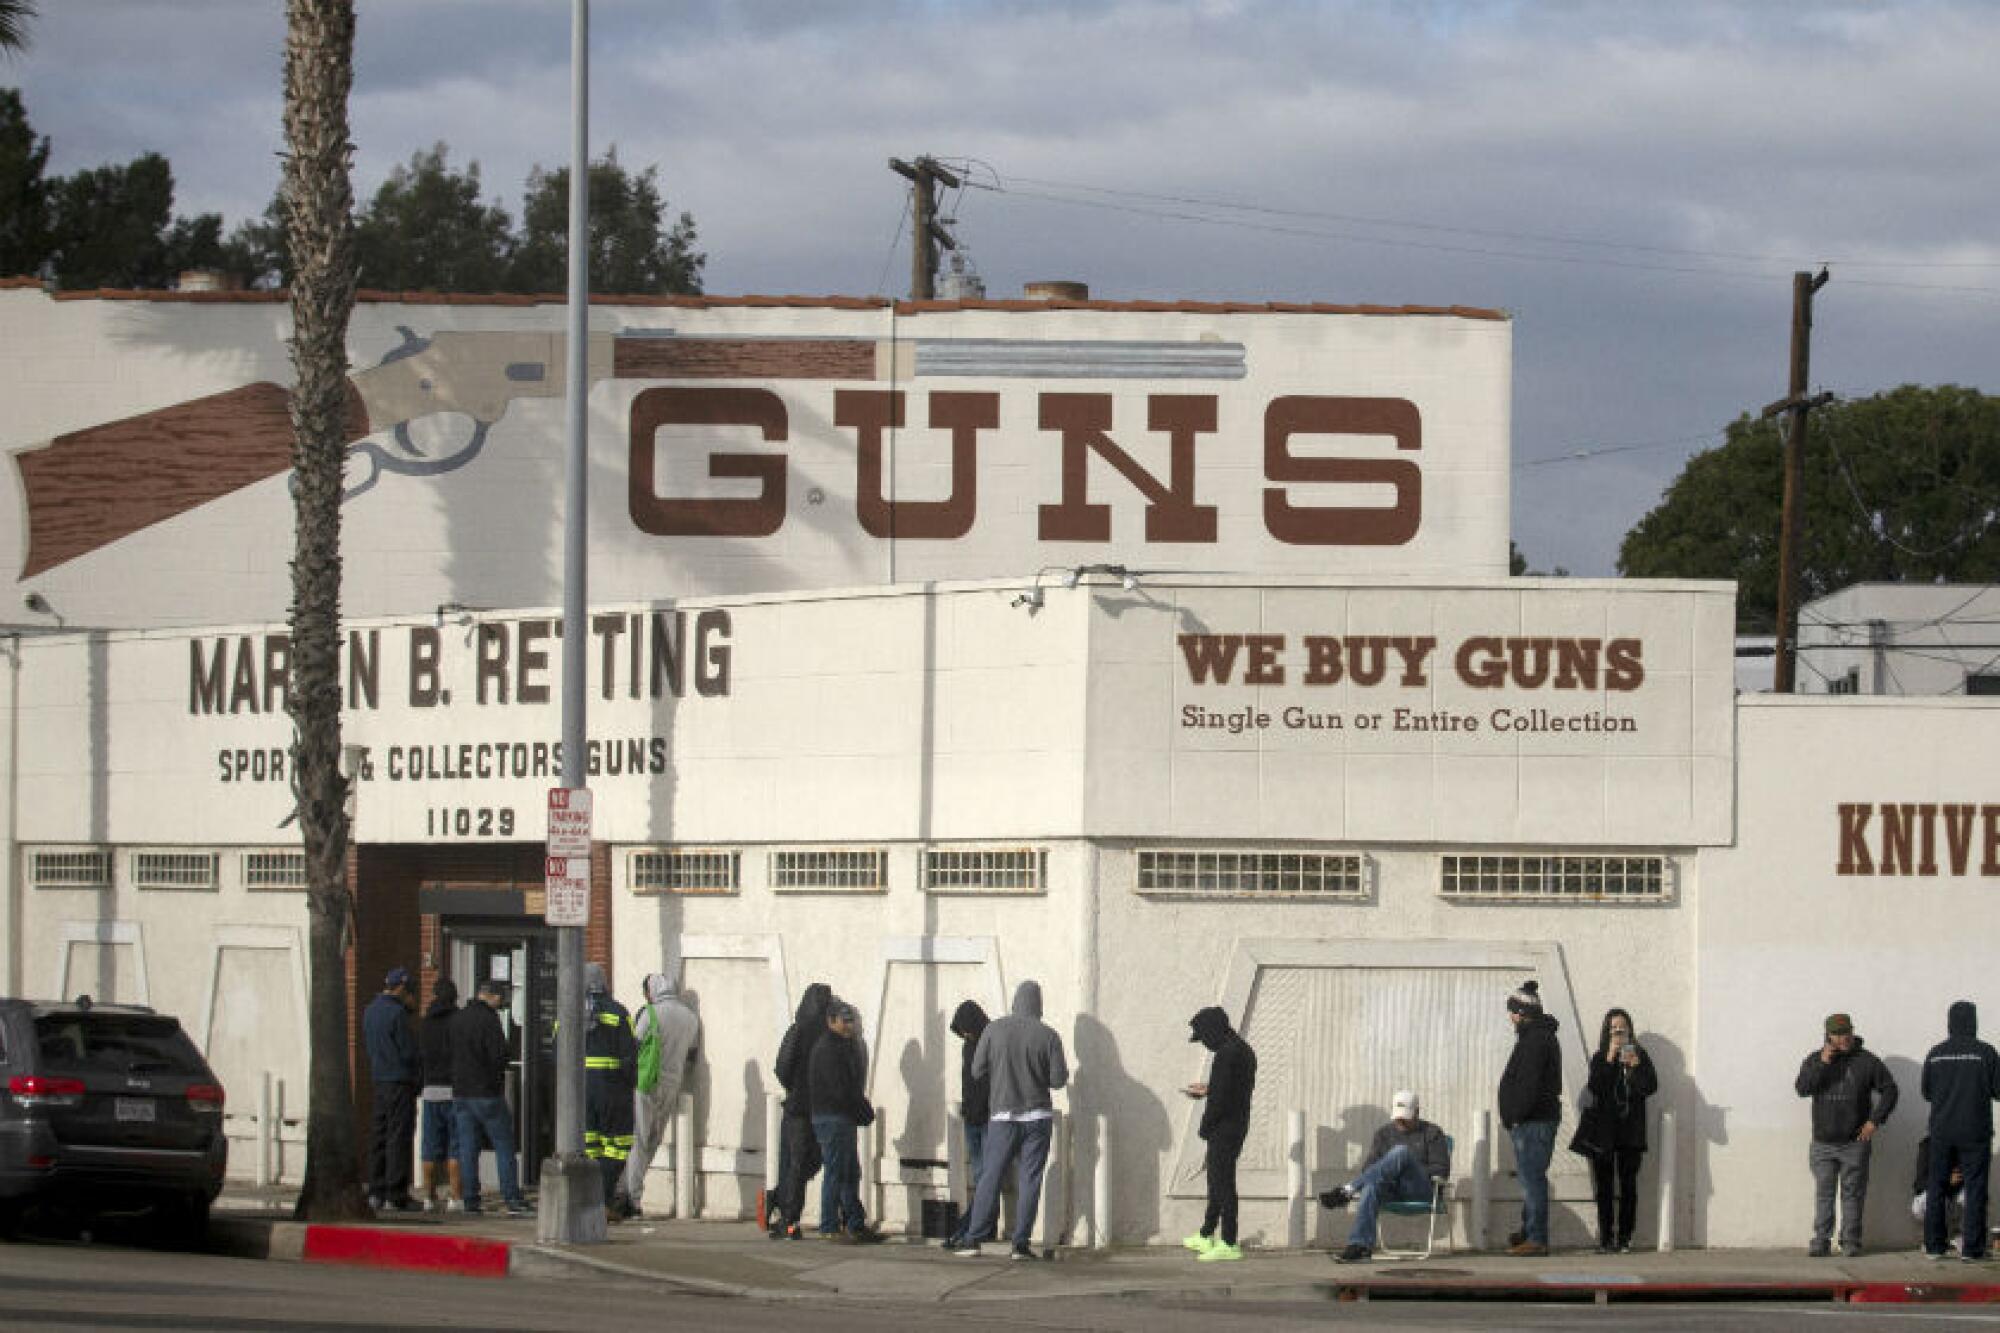 A line of people stand outside the Martin B. Retting gun store in Culver City in March 2020